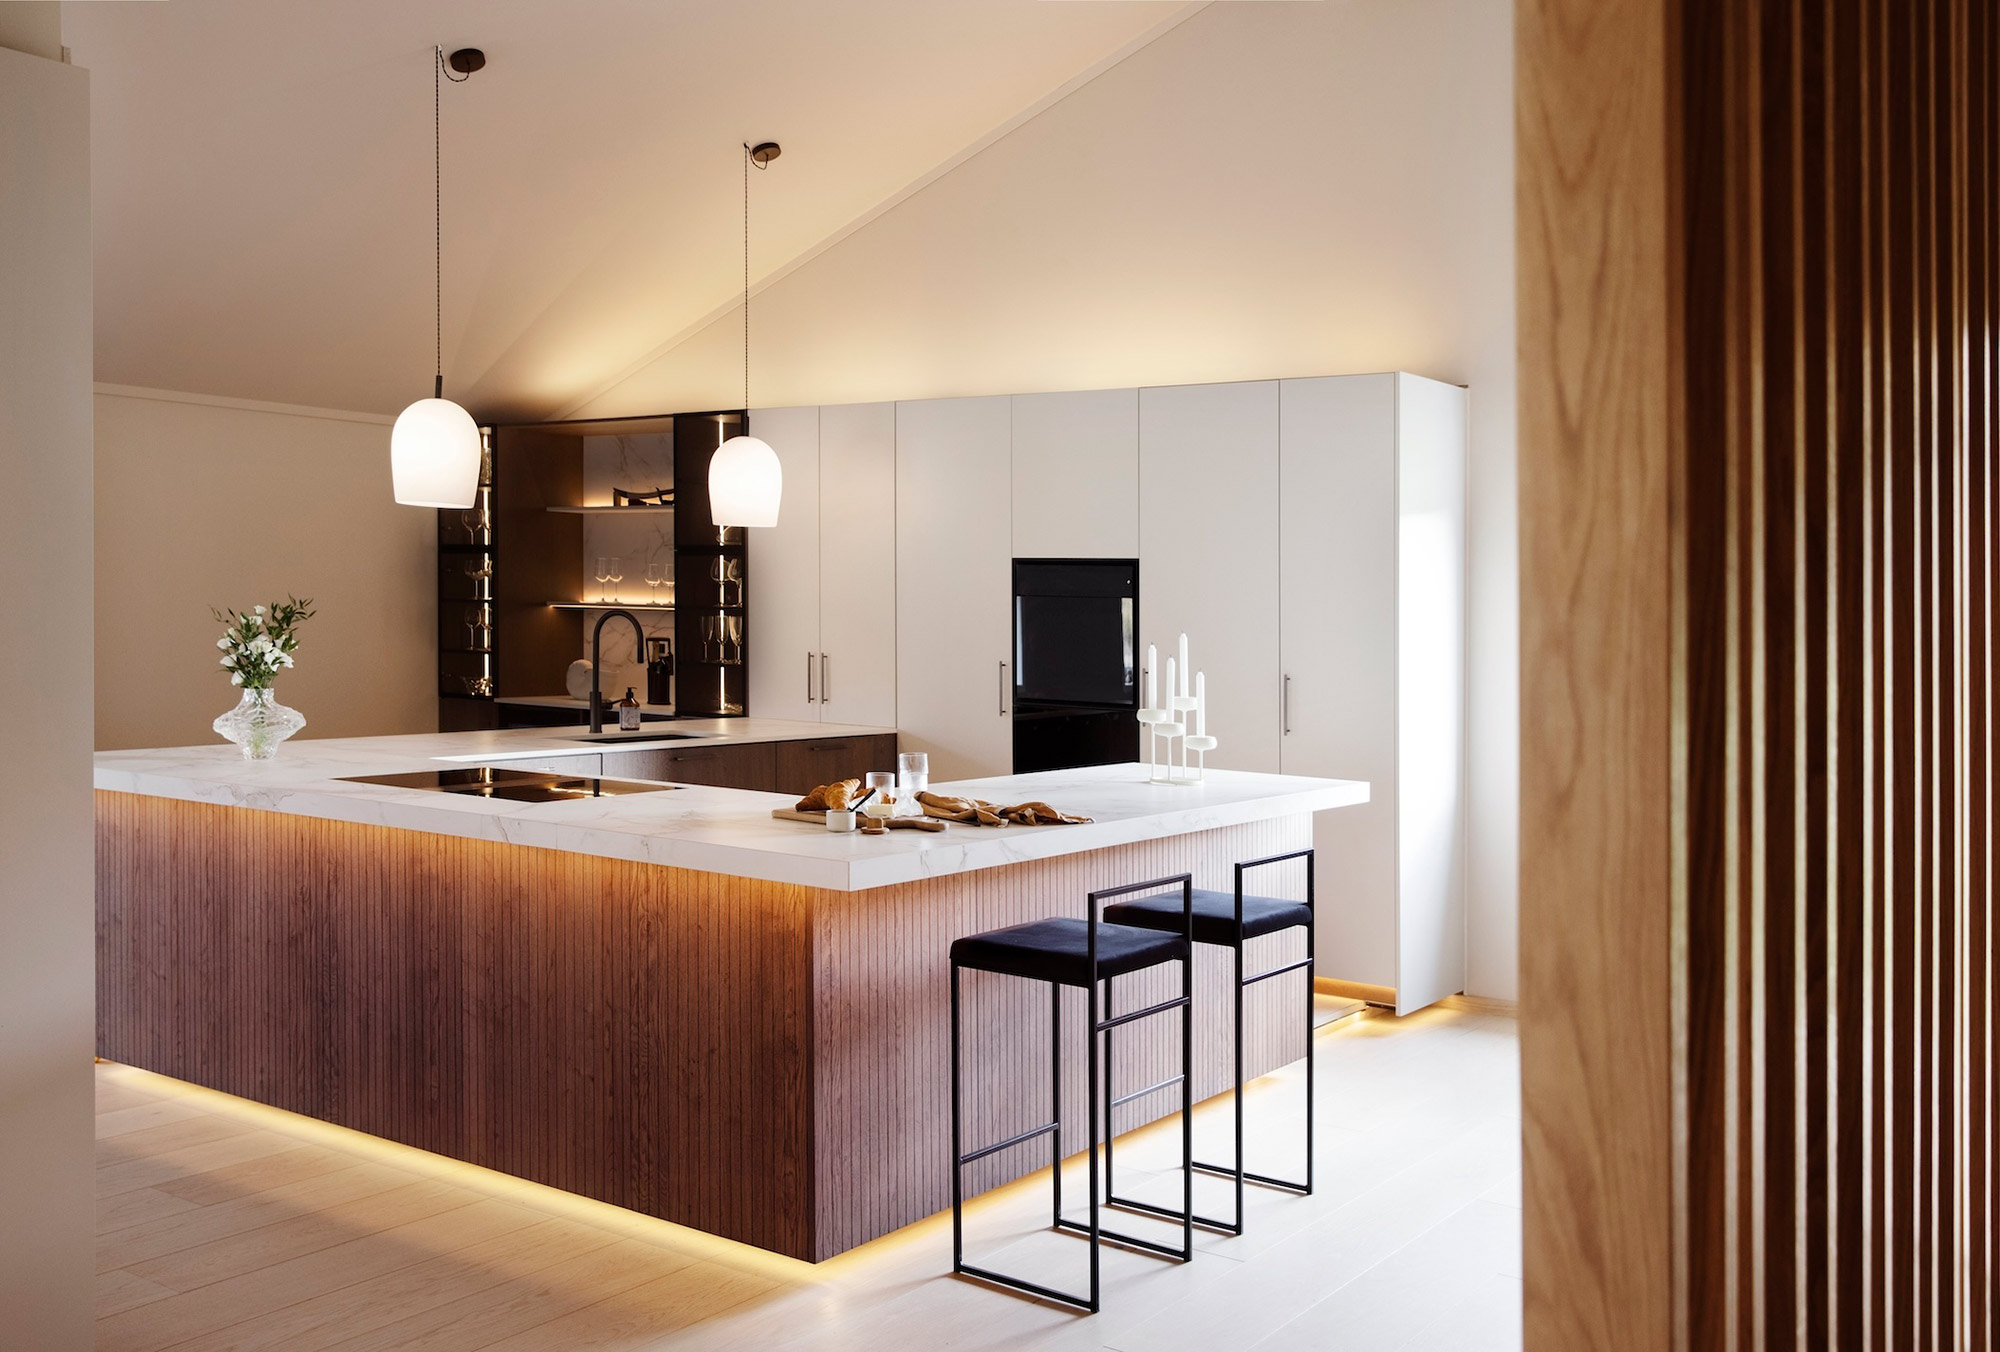 Image of Mads Clemmetsen 1 in All in beige: a personal kitchen that blends styles by House Loves - Cosentino